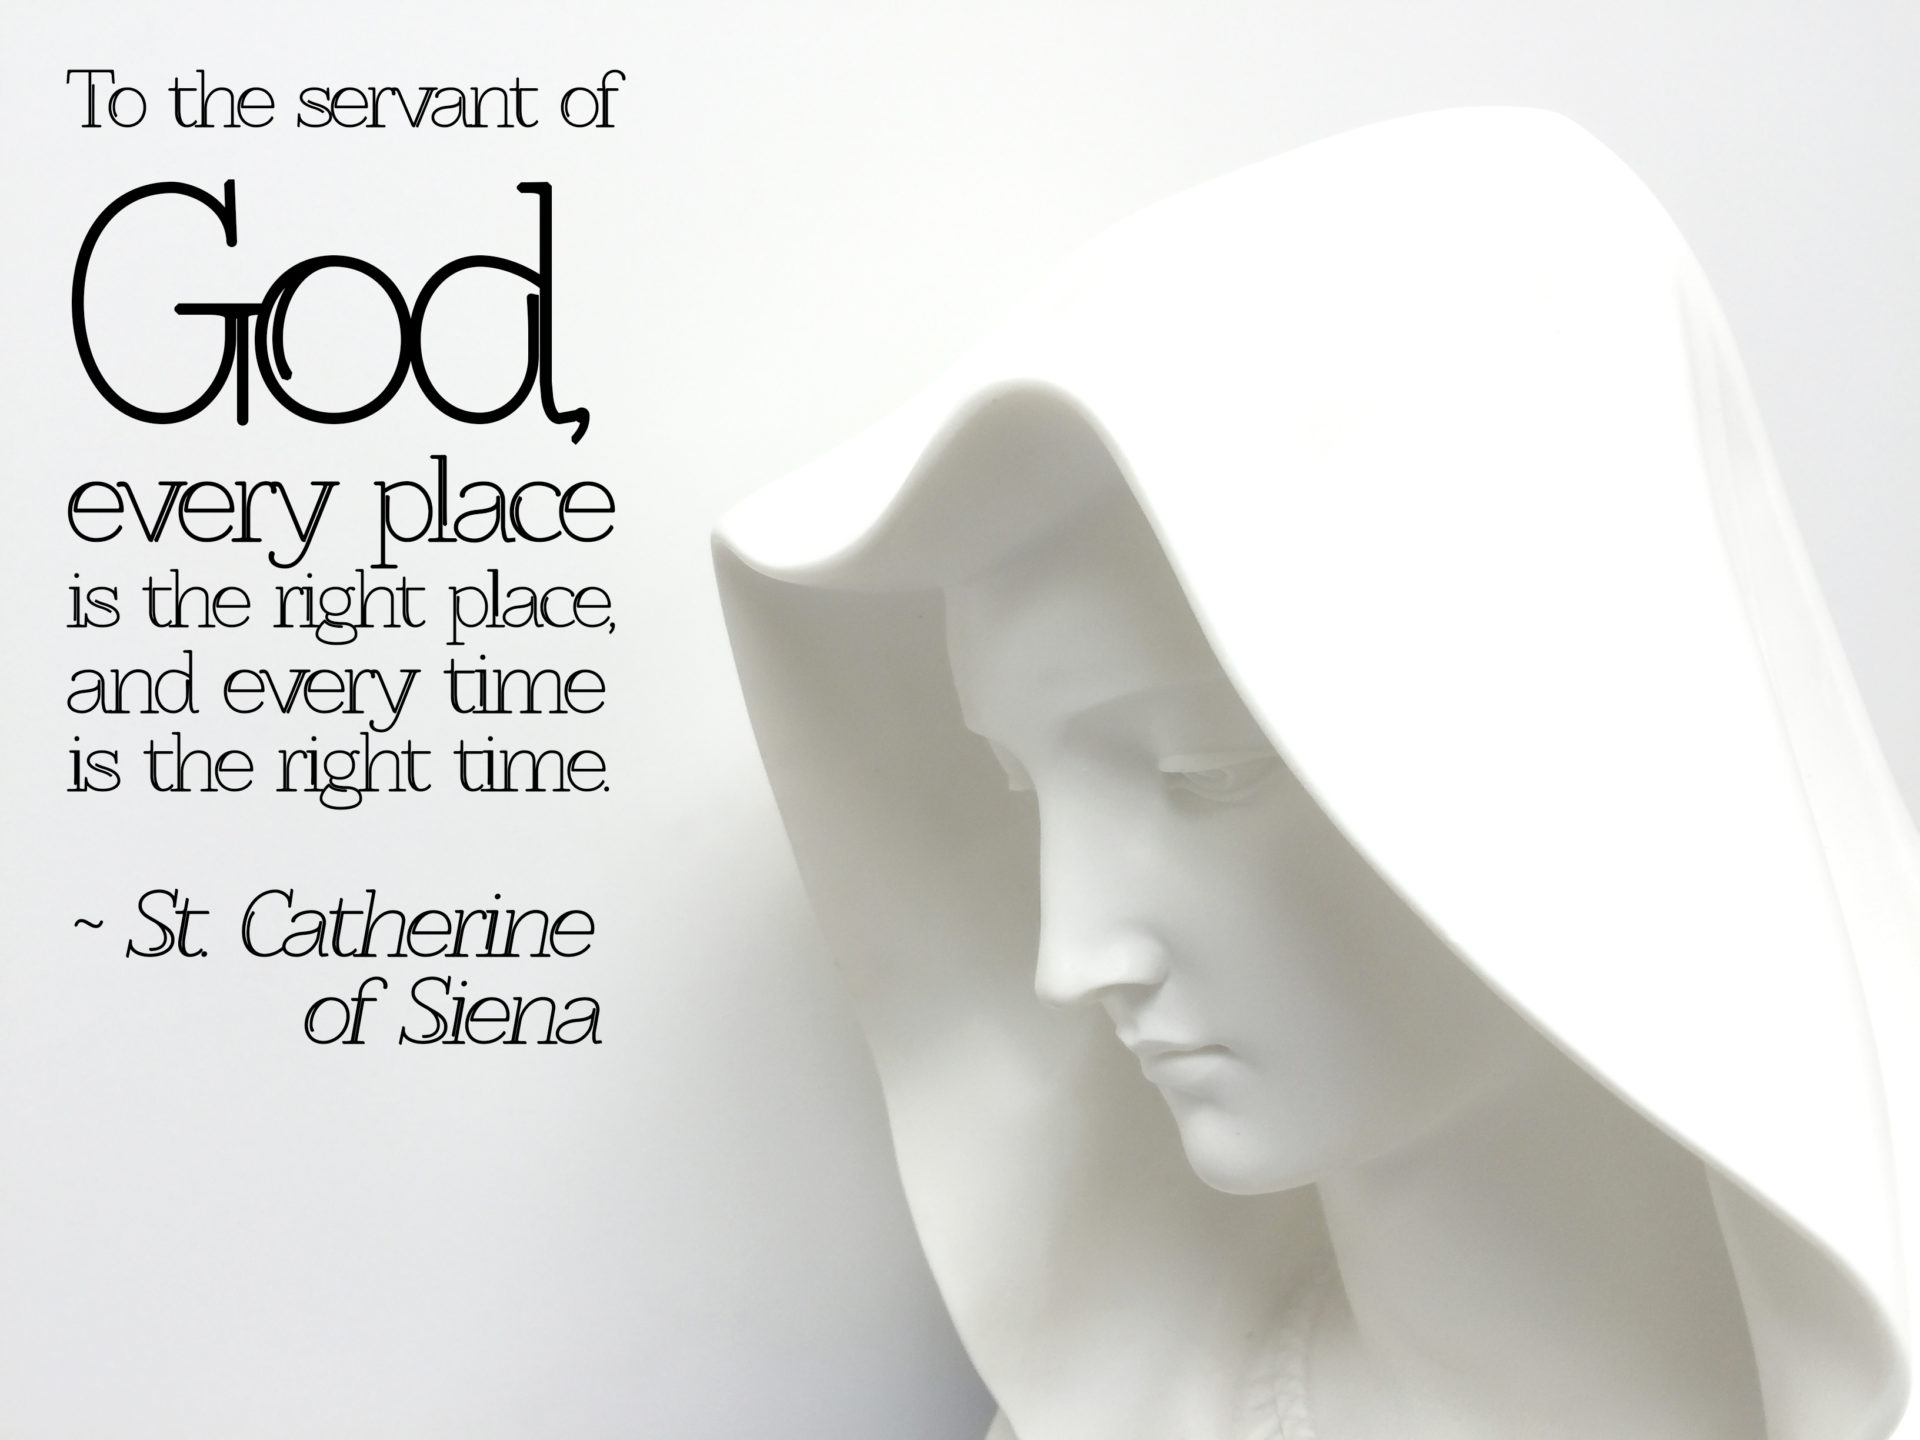 To the servant of God, every place is the right place, and every time is the right time. ~ St. Catherine of Siena